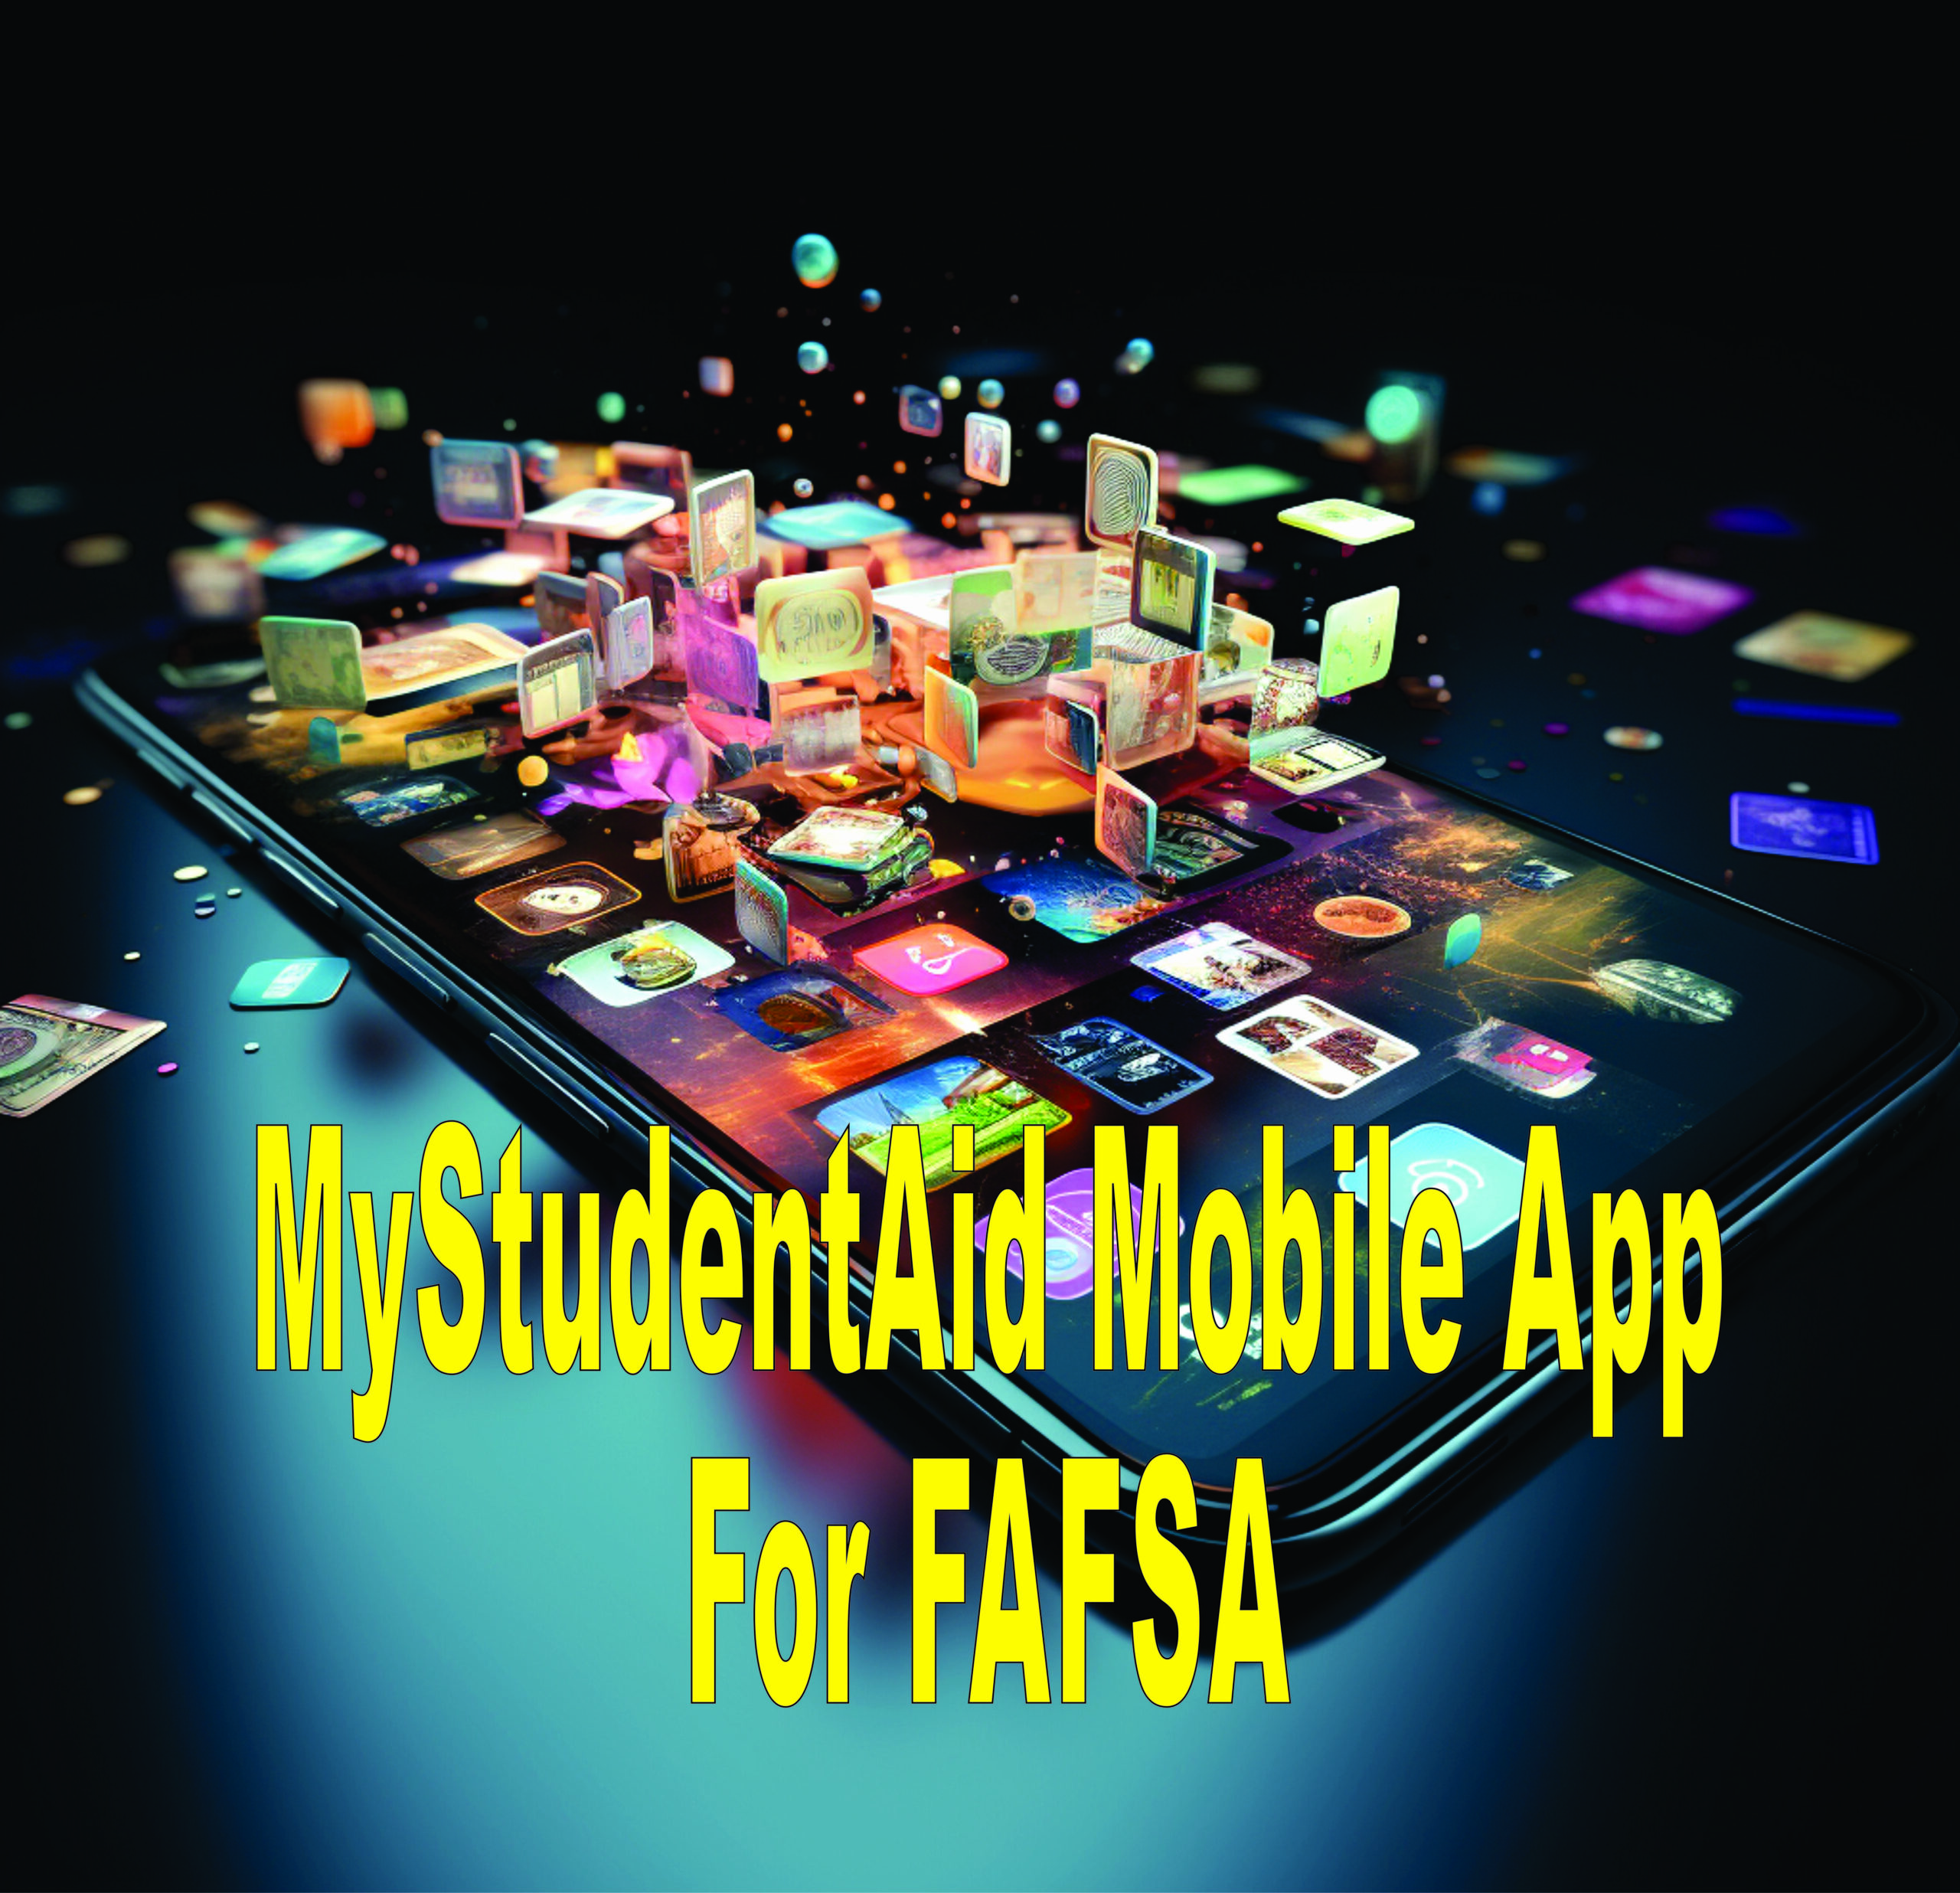 Mystudentaid Mobile App For Fafsa